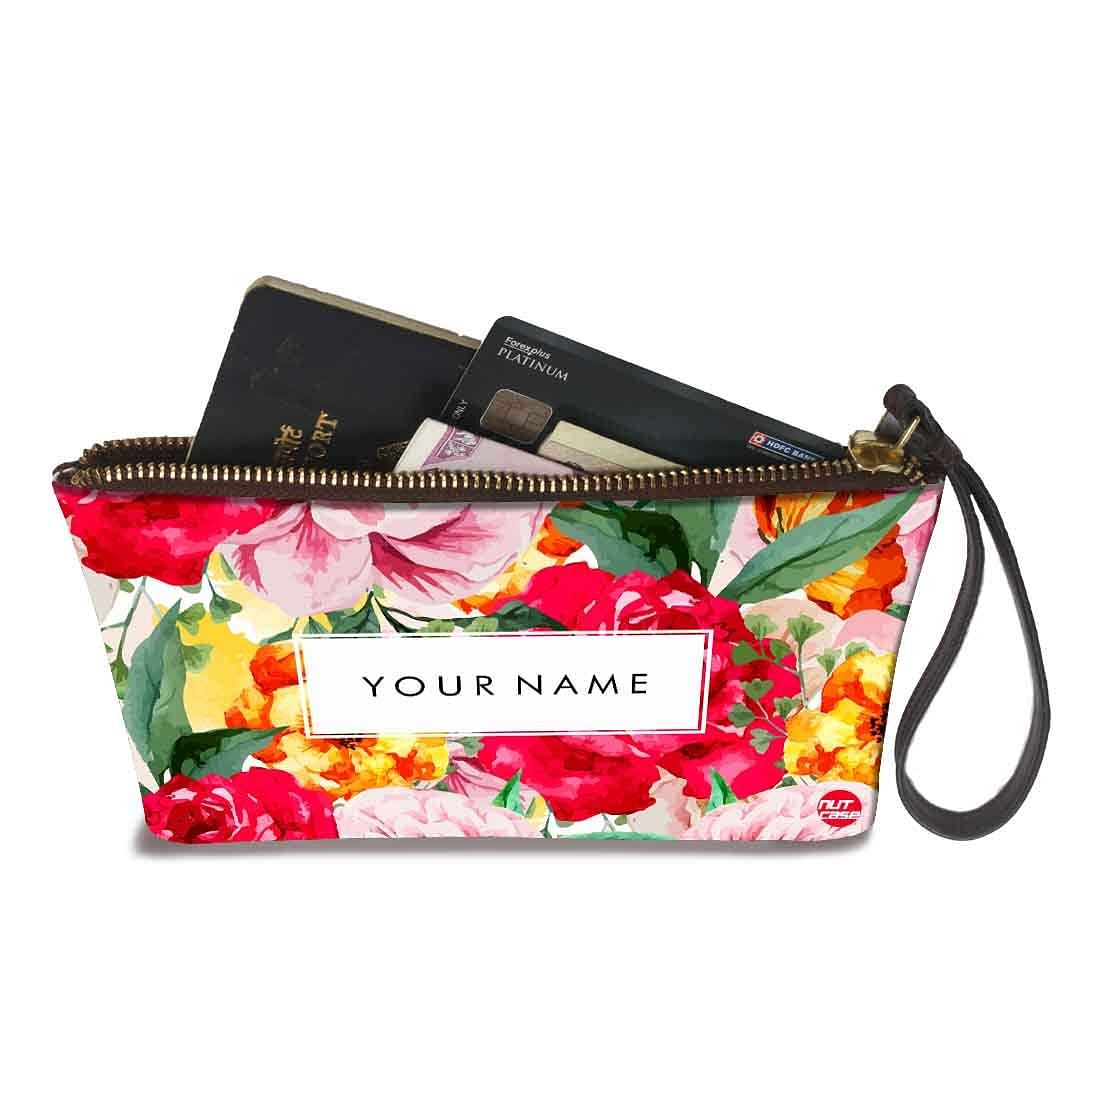 Stoney Clover Lane | Travel Accessories - Personalized Pouches & Bags